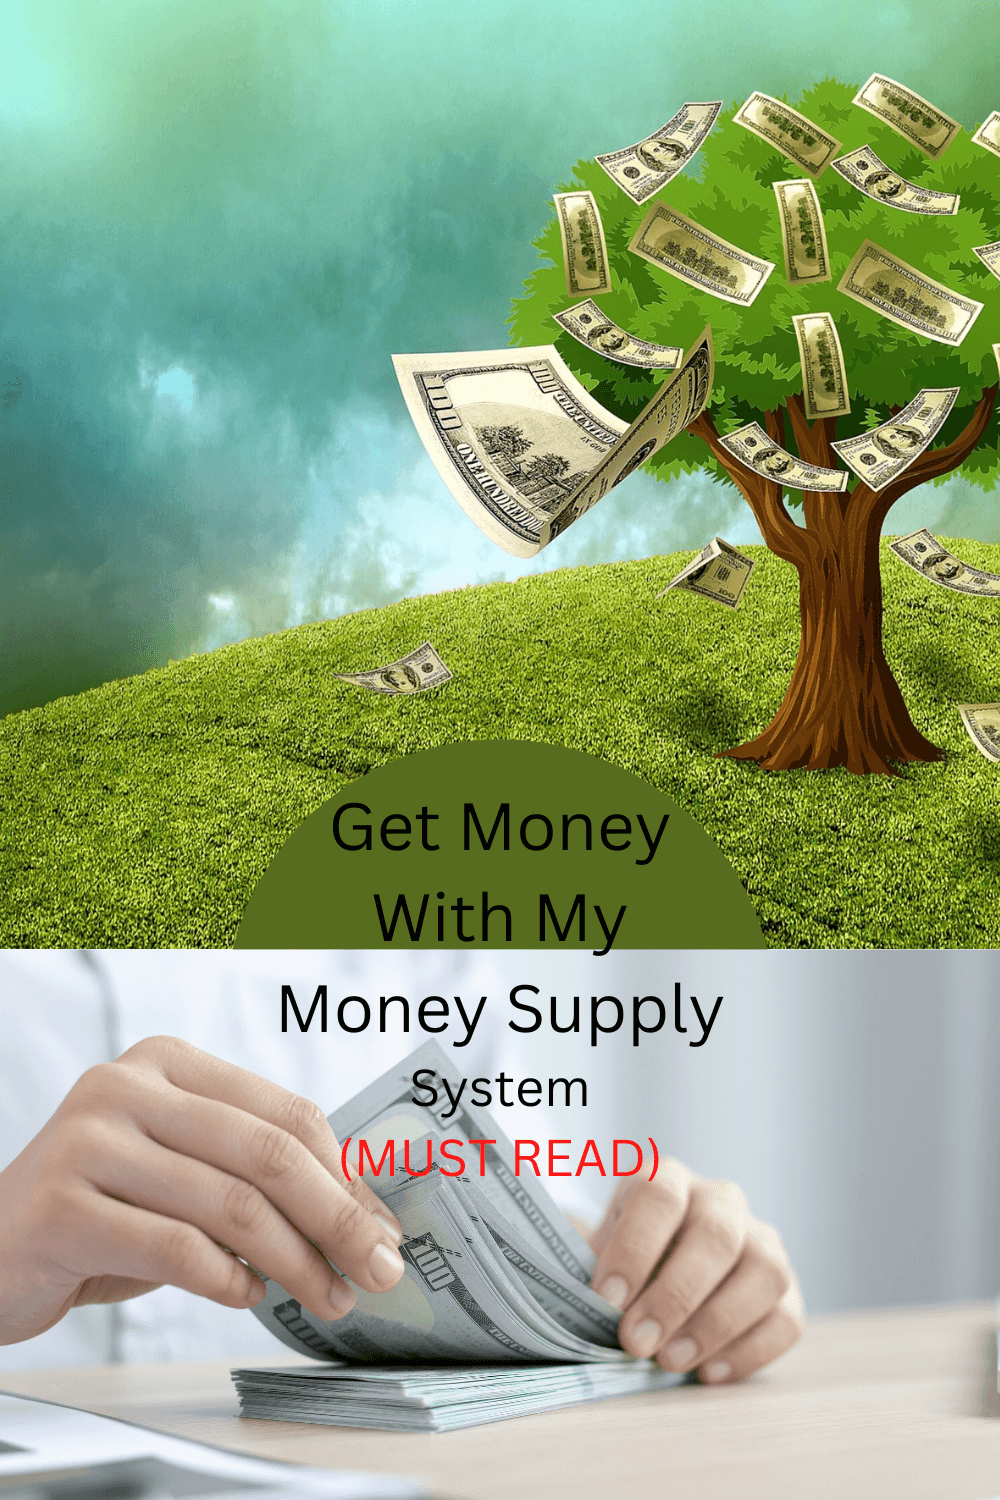 Get Money With My Money Supply System